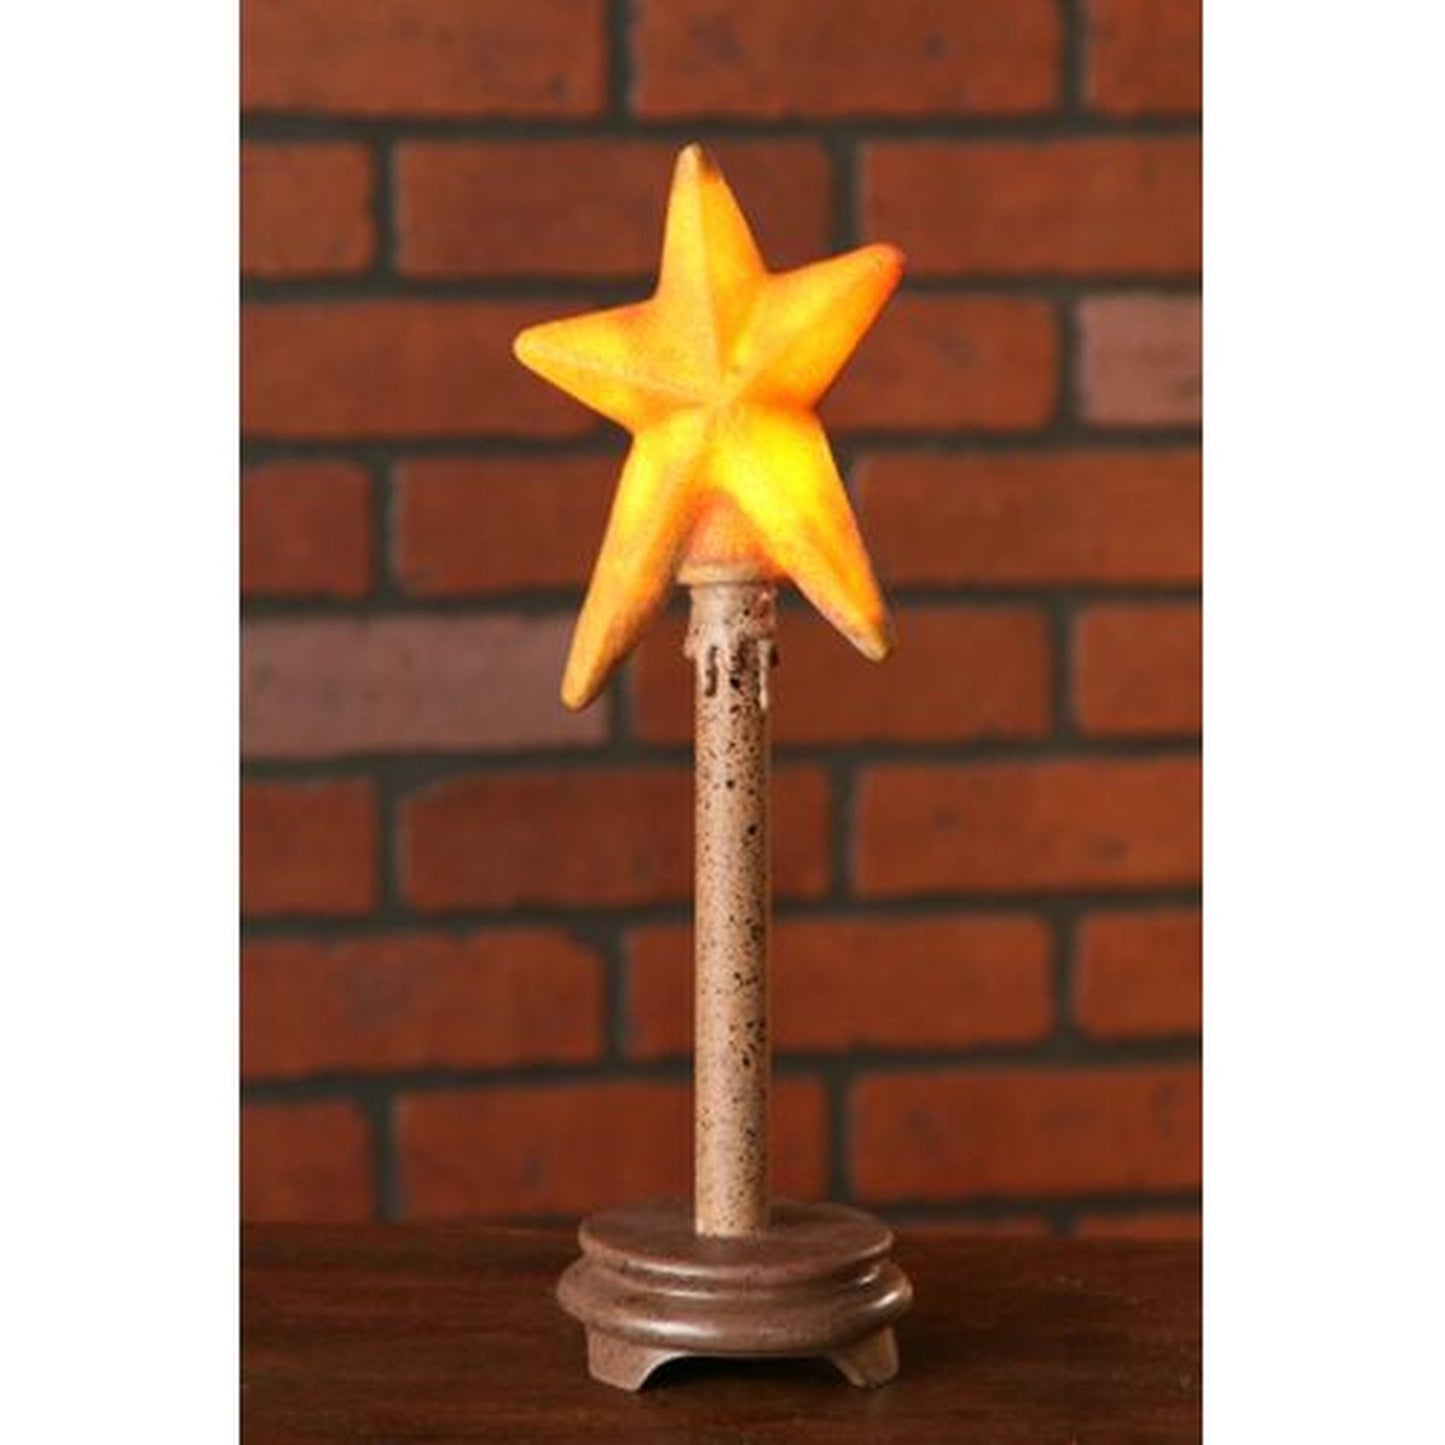 Your Heart's Delight Electric Light  Candle - Star Topper